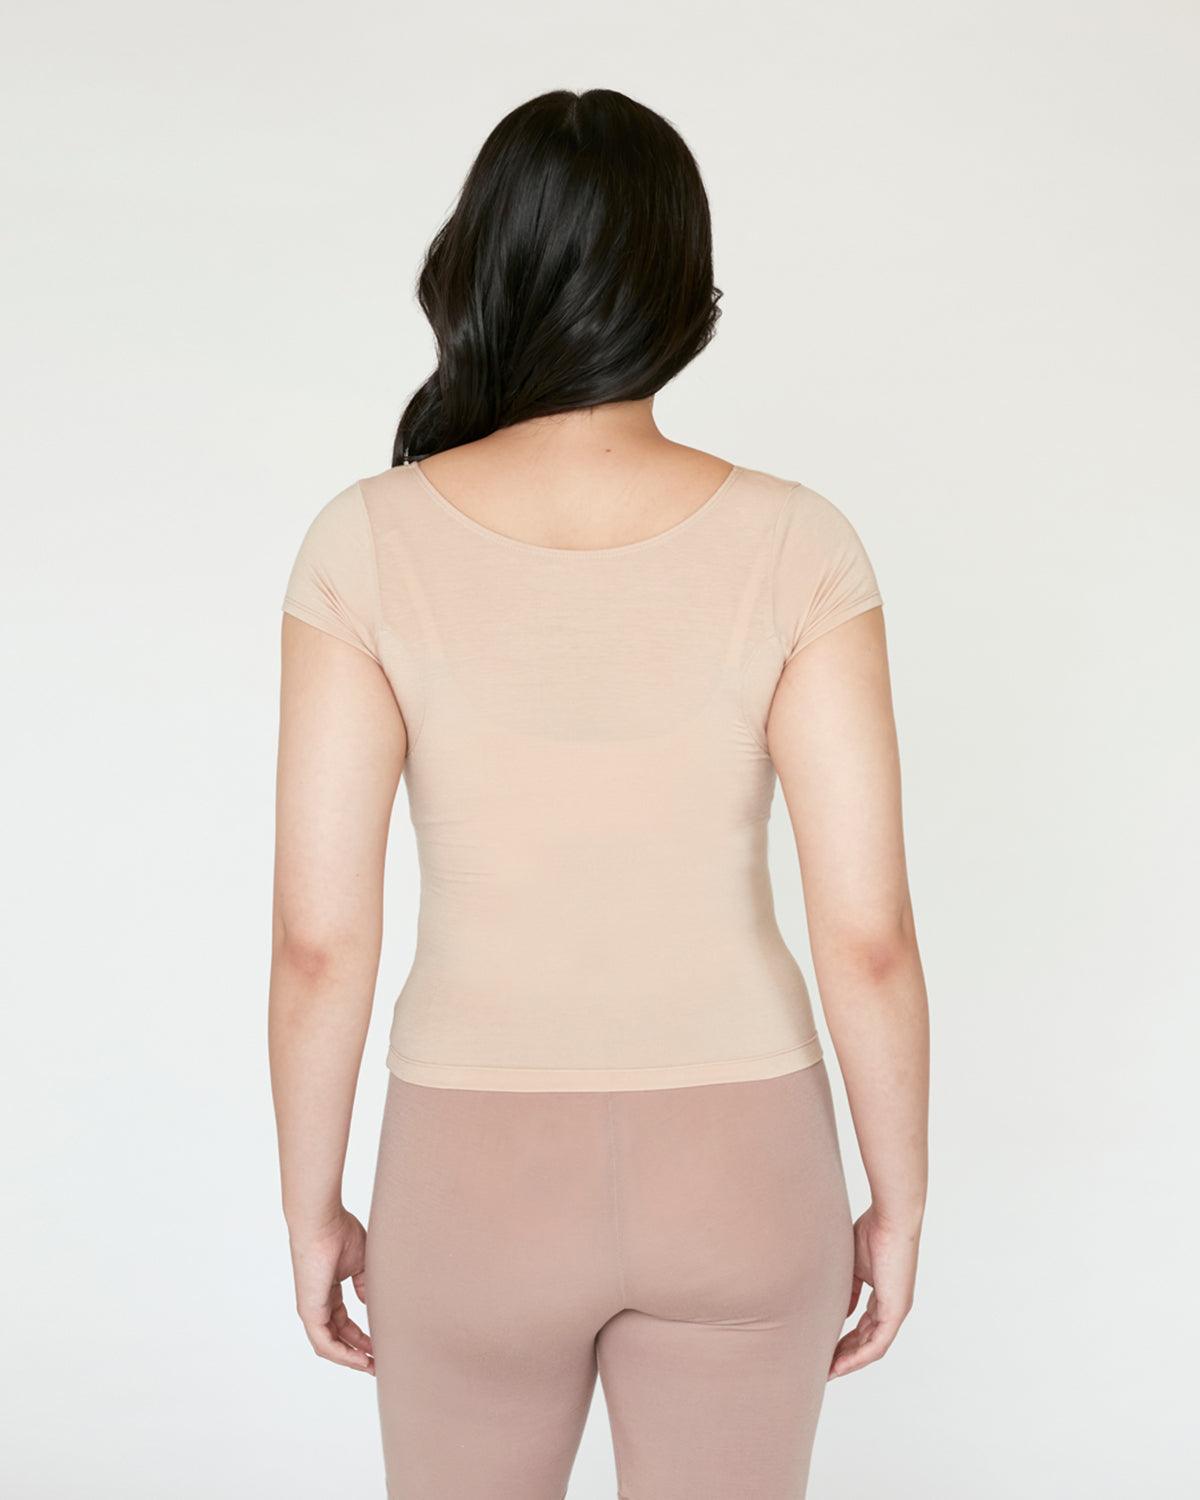 "#color_almond| Emi is 5'7.5", wearing a size S